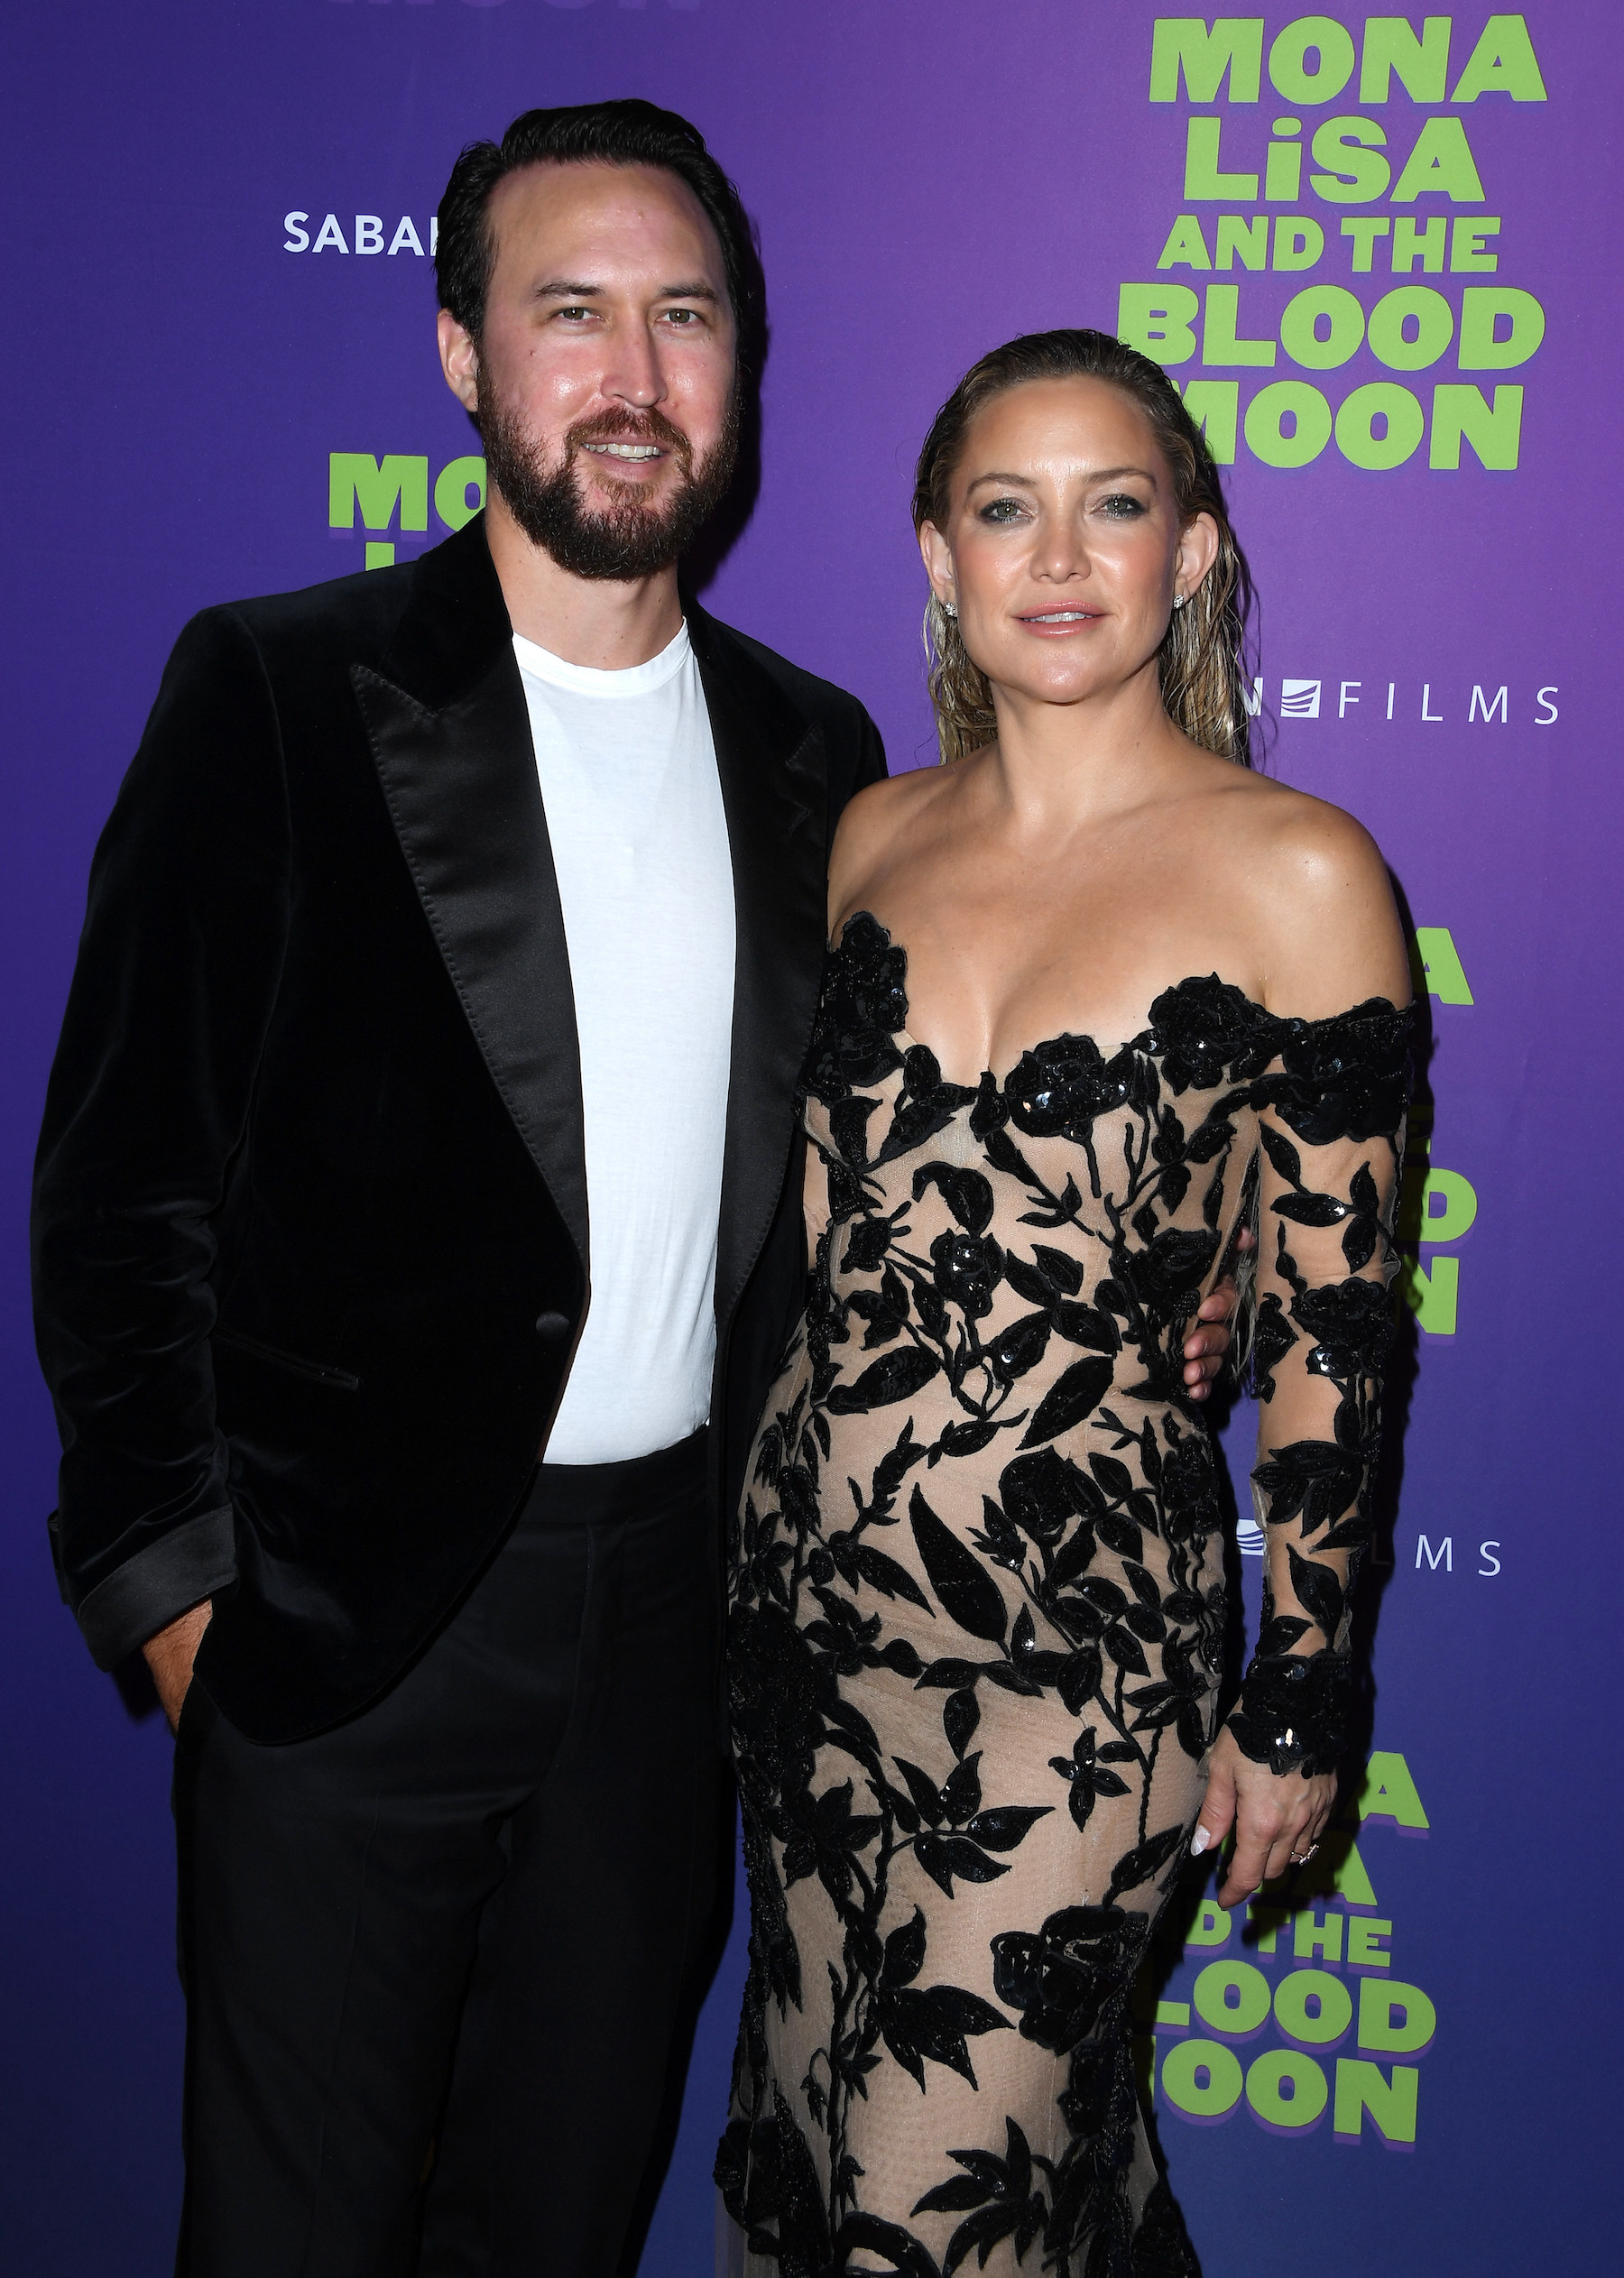 the couple at a movie premiere